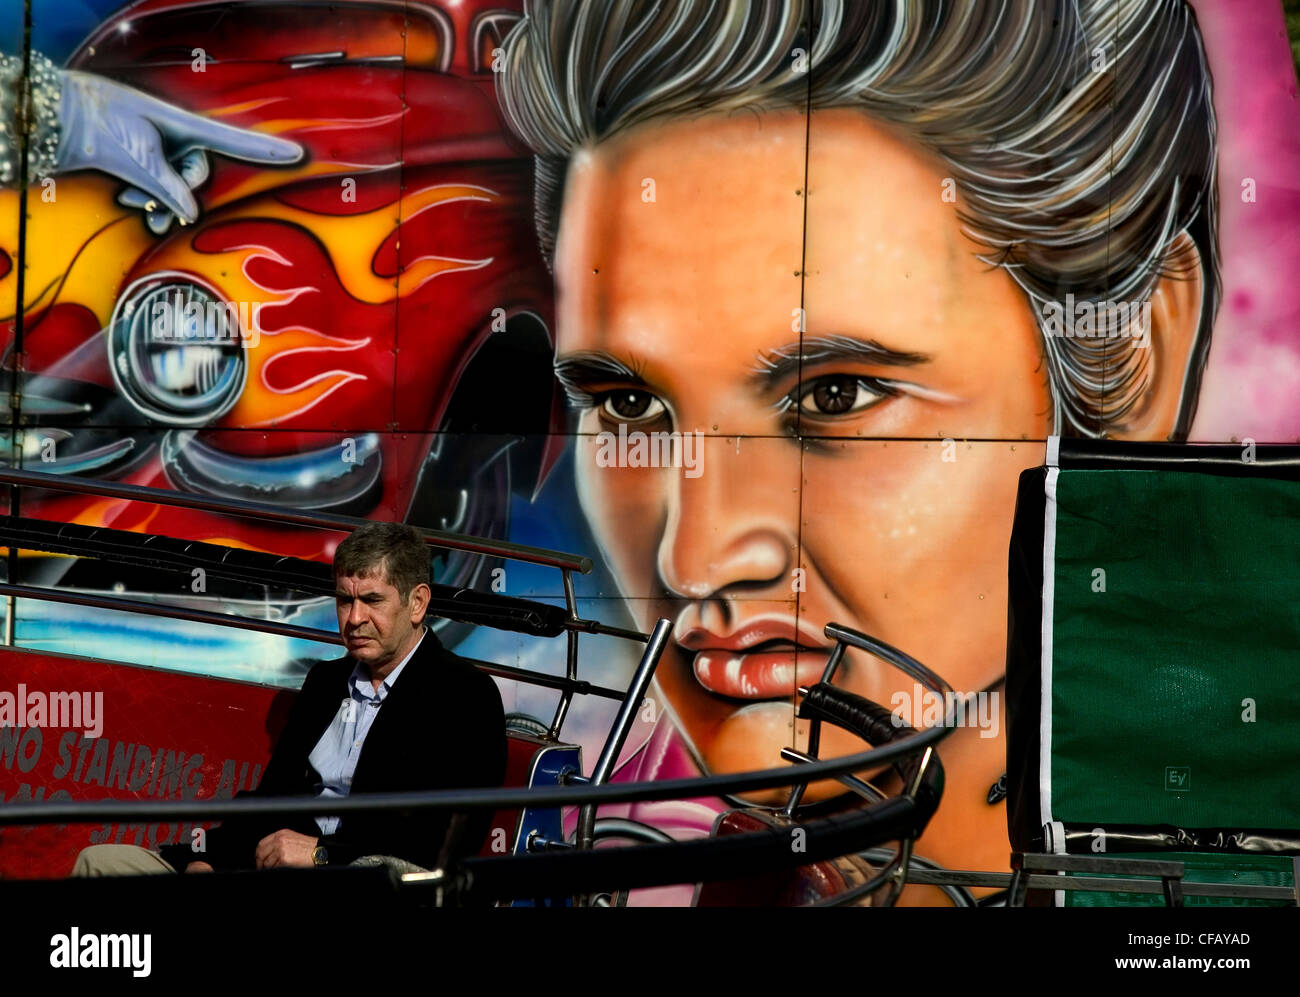 Fairground on Hampstead heath, London. Man sits on bench in front of wall mural featuring face of Elvis Presley and car Stock Photo